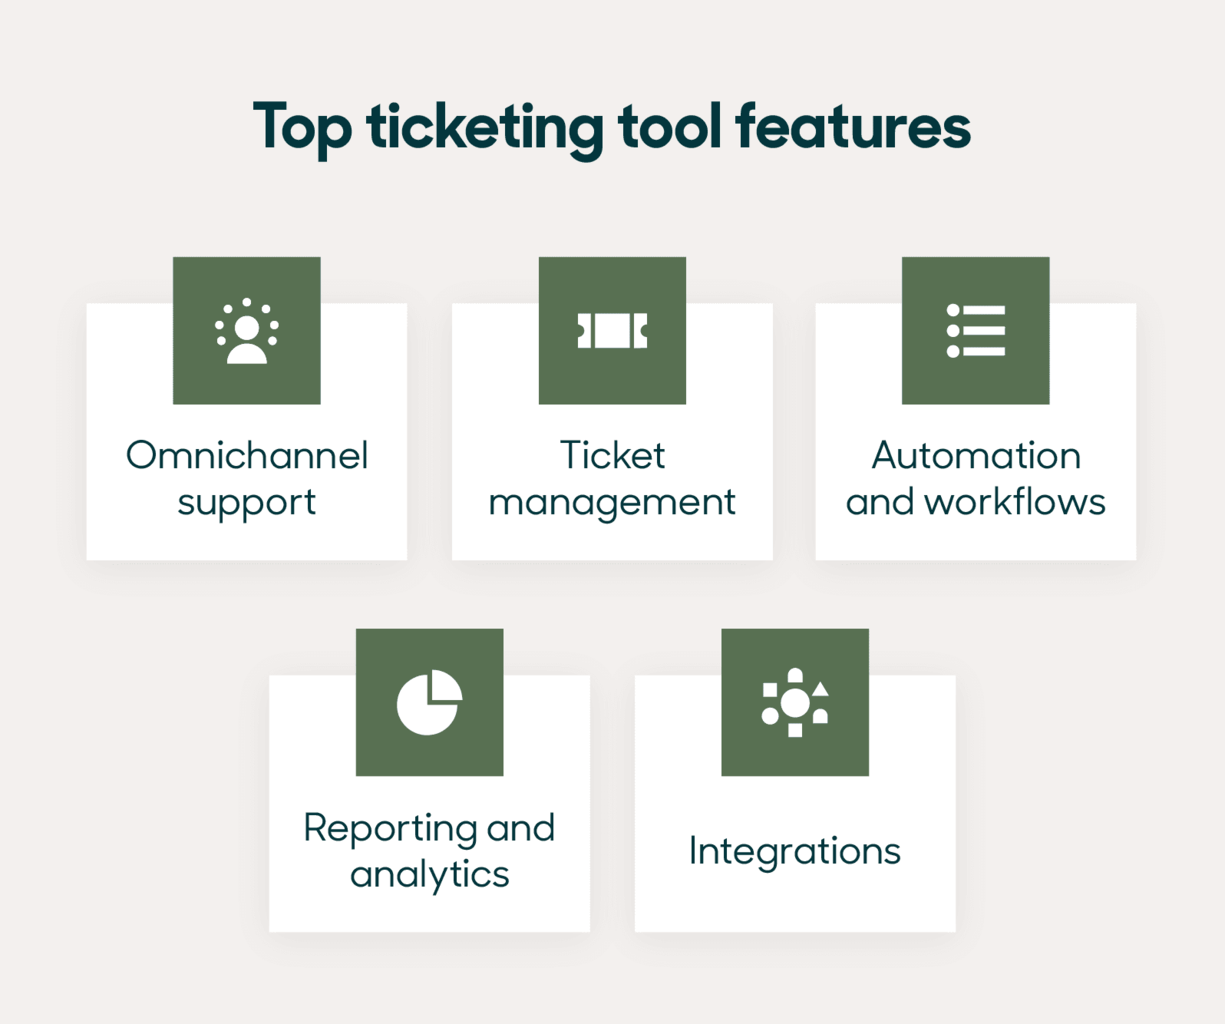 Top ticketing tool features